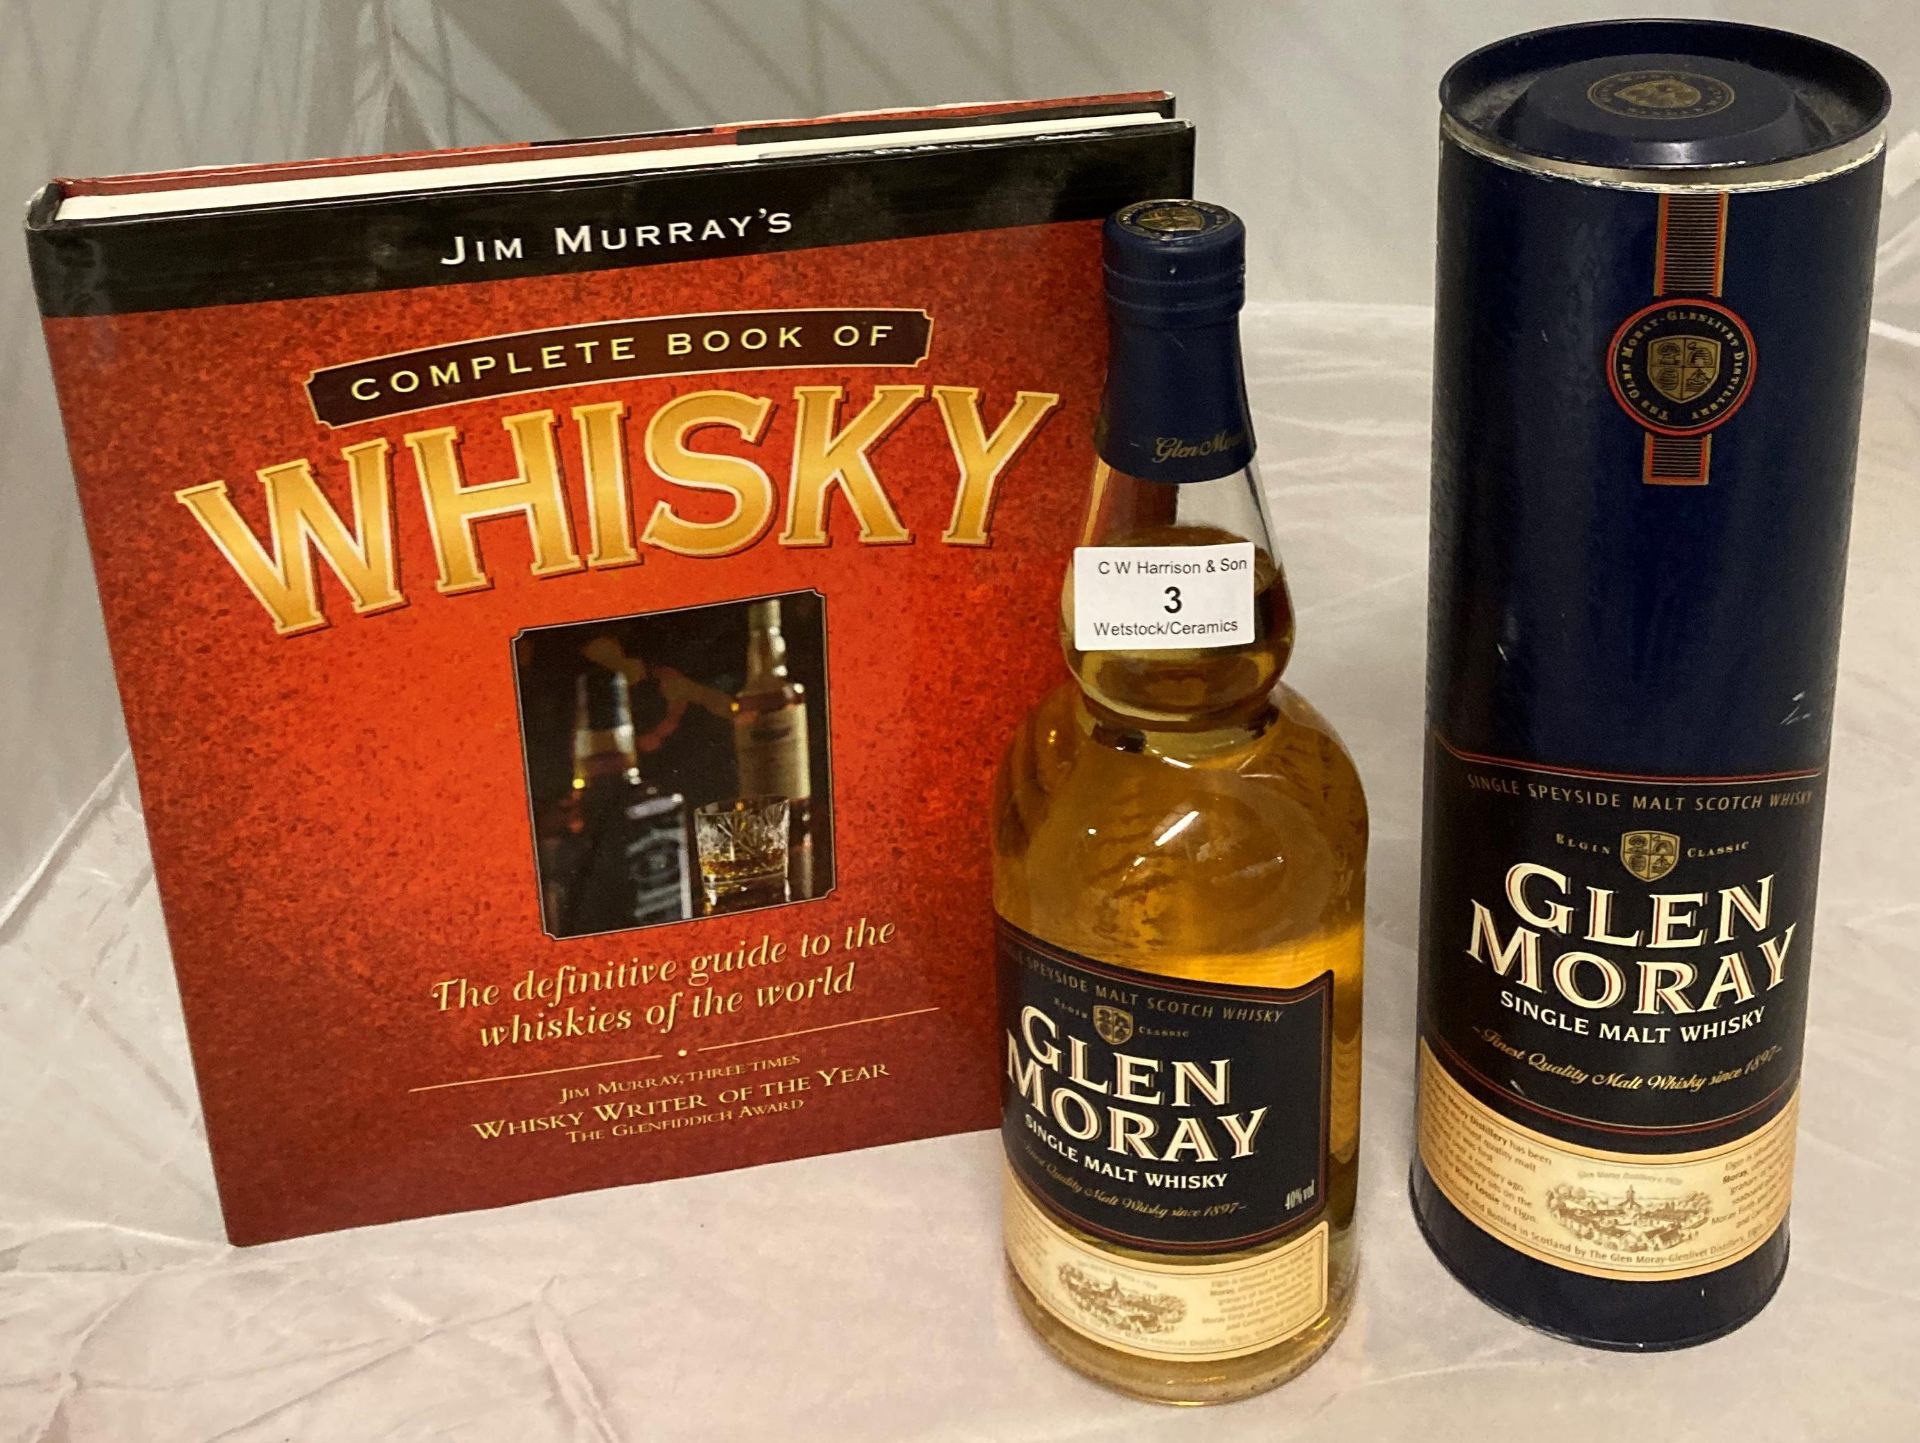 A 70cl bottle of Glen Moray Single Malt Whisky 40% volume in presentation canister and Jim Murray's - Image 2 of 2